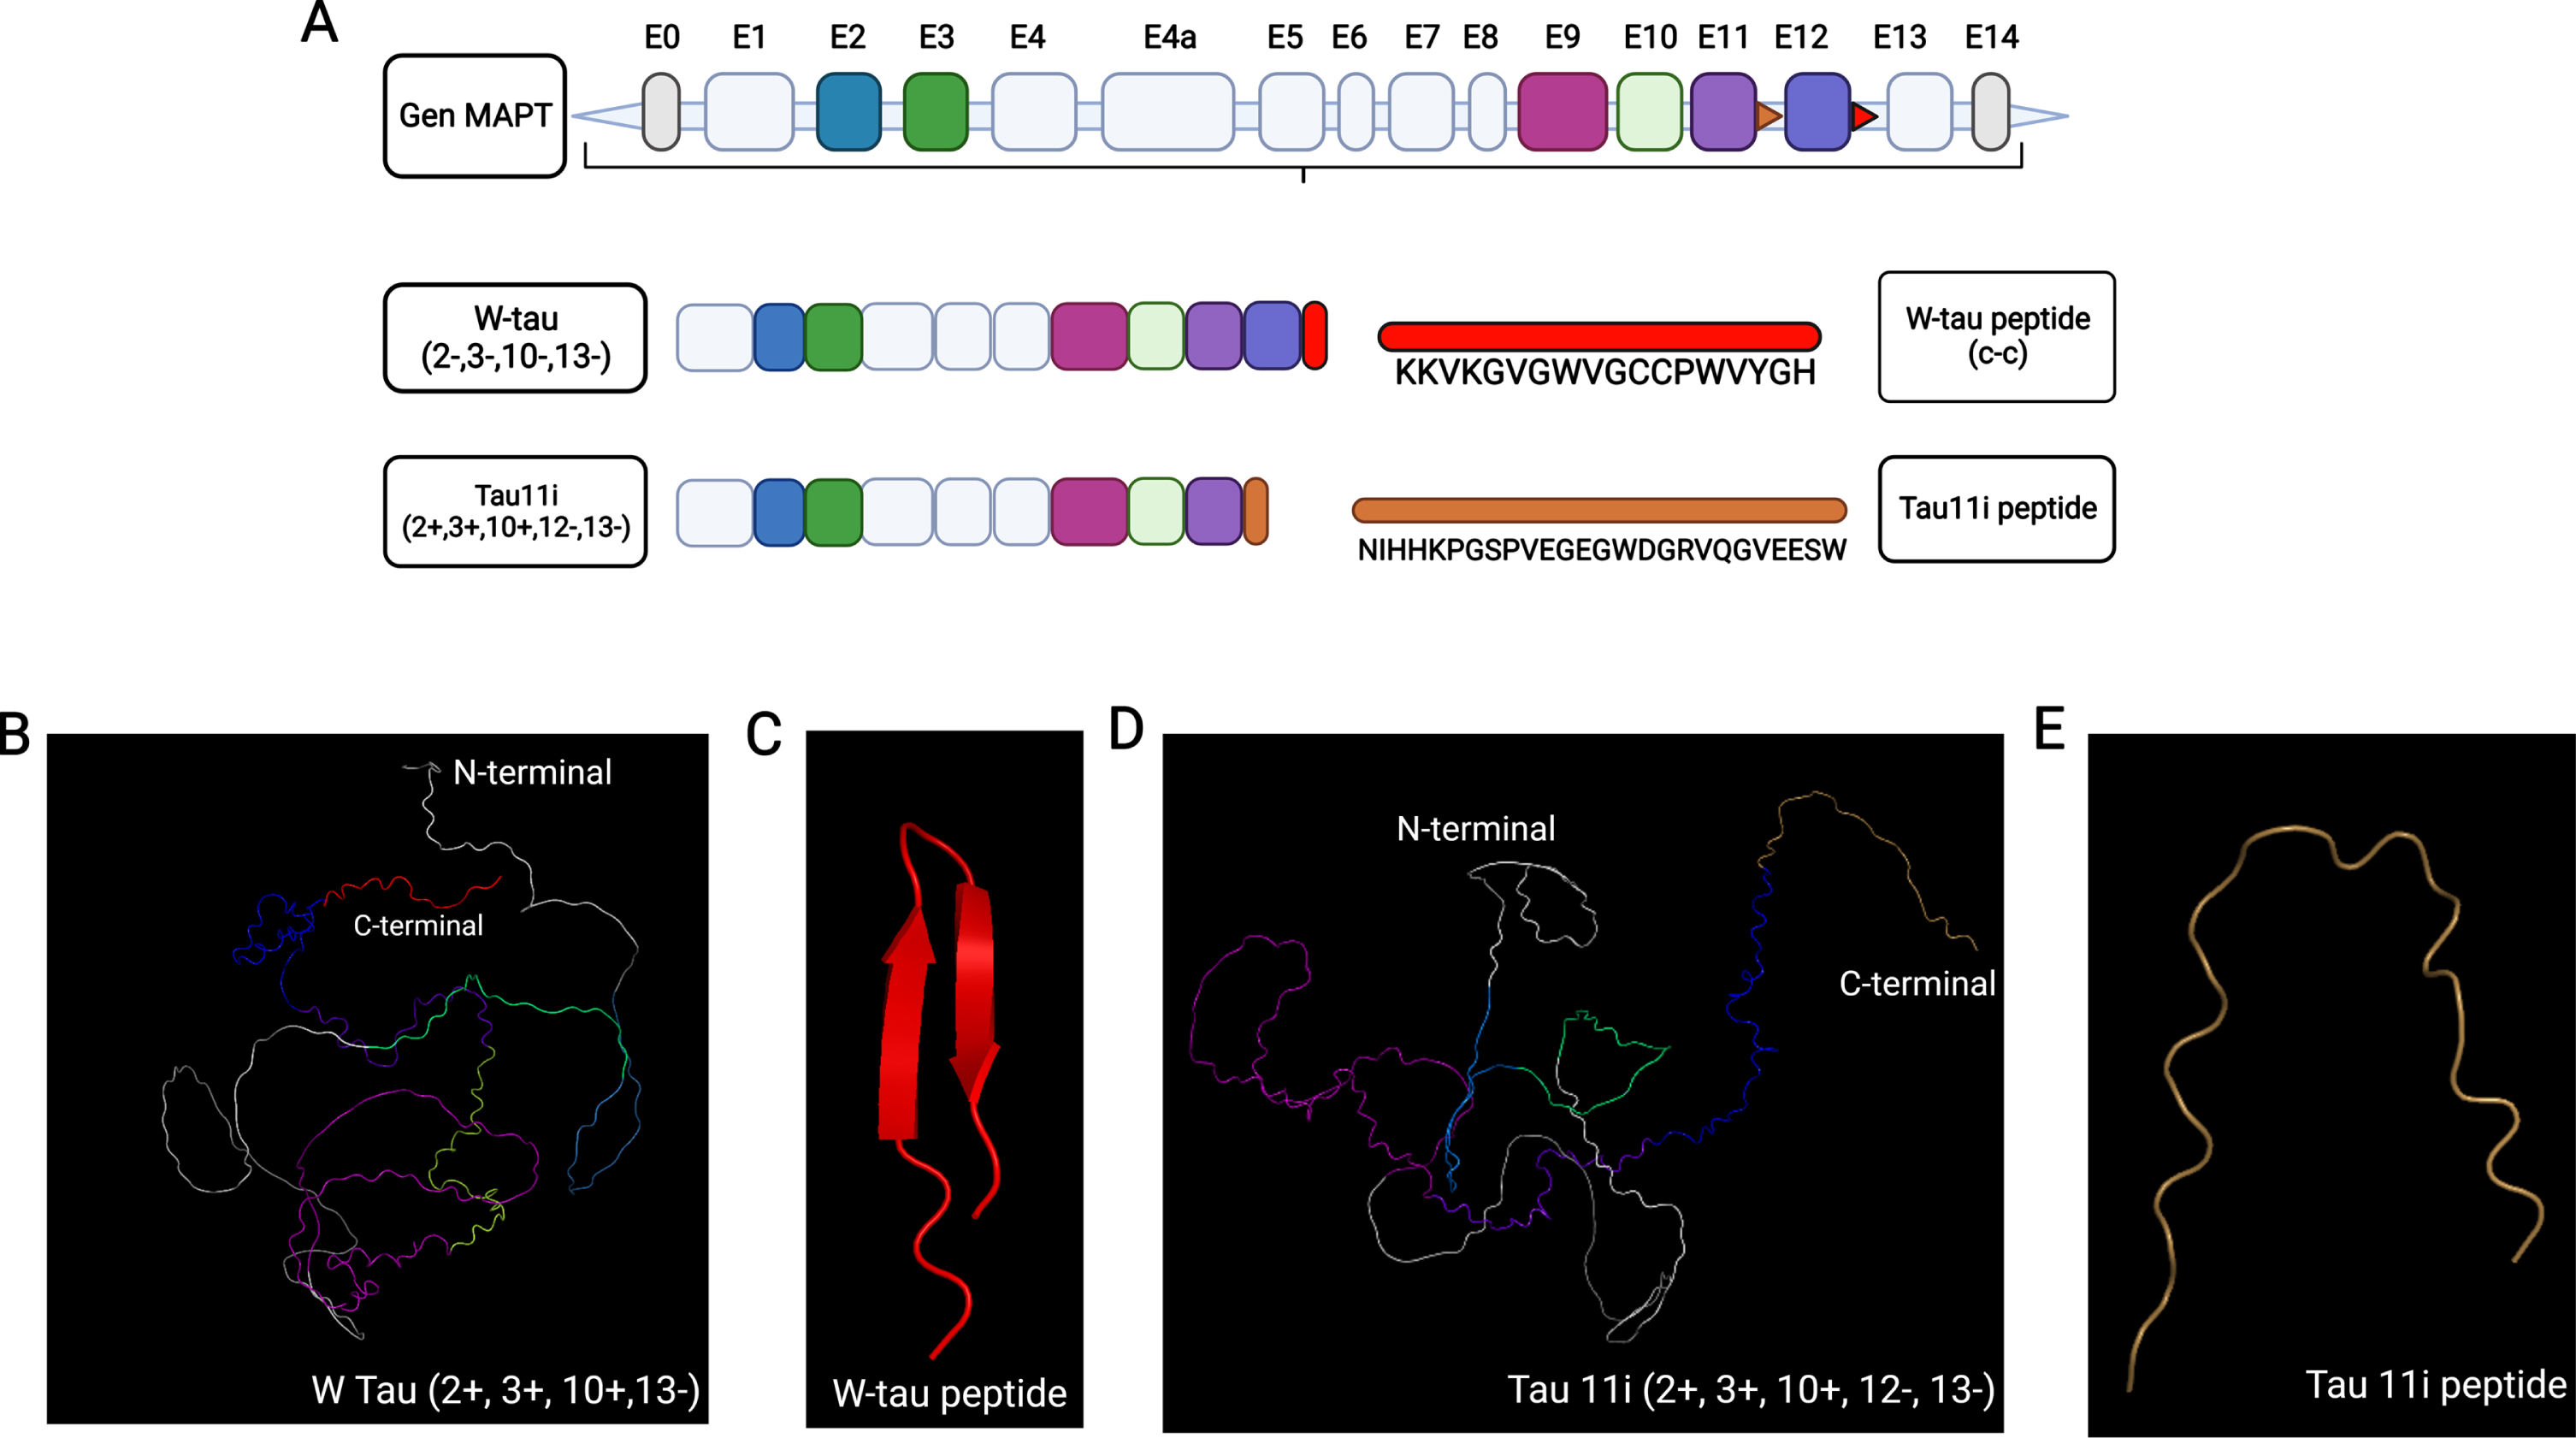 AlphaFold-predicted structure of tau isoforms generated by intronic retention. A) Diagram of MAPT gene and tau isoform generated by intron 12 retention. W-tau and Tau11i intronic retention isoforms together with their respective expressed intronic sequences are shown. B) Predicted tridimensional structure of the W-tau including exons 2, 3, 10, and intron 12 retention. C) Predicted structure of peptide sequence expressed because of intron 12 retention (Red). D) Predicted tridimensional structure of the Tau11i. E) Predicted structure peptide sequence expressed because of intron 11 retention (Brown). The color scale would be as follows: violet for exon 9, blue purple for exon 11, sky blue for exon 2, green for exon 3, lime green for exon 10 and brown for intronic retention.